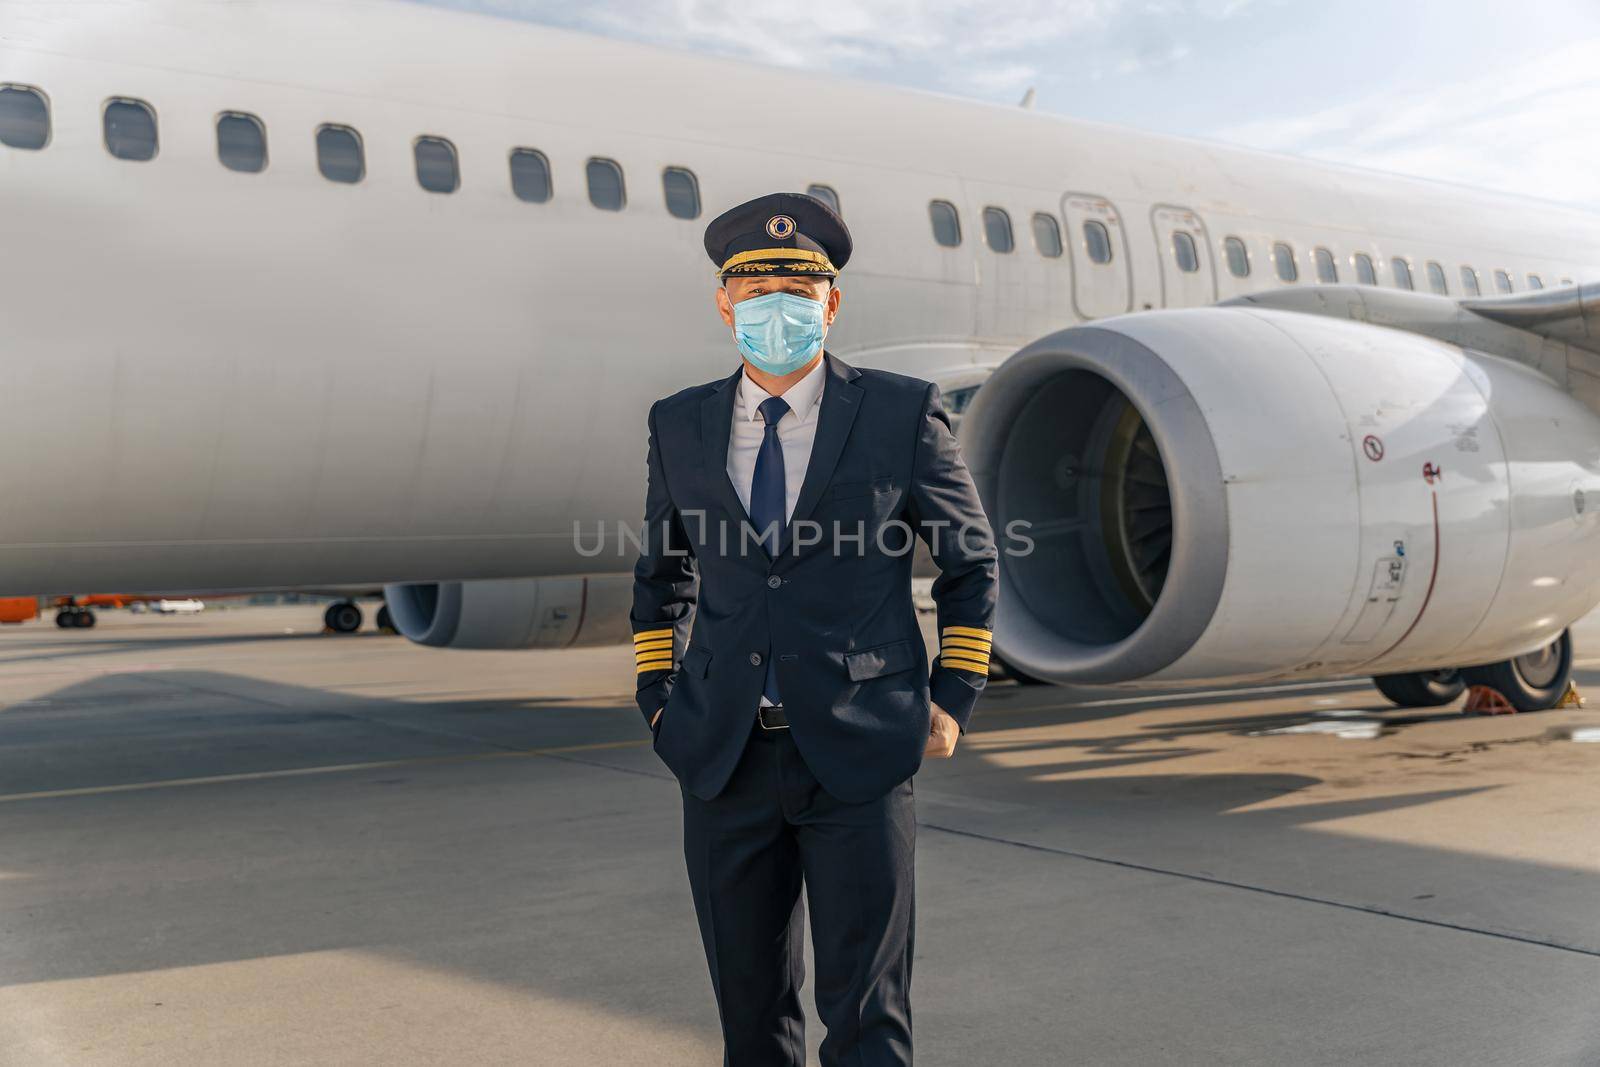 Airline pilot in mask standing near aircraft by Yaroslav_astakhov